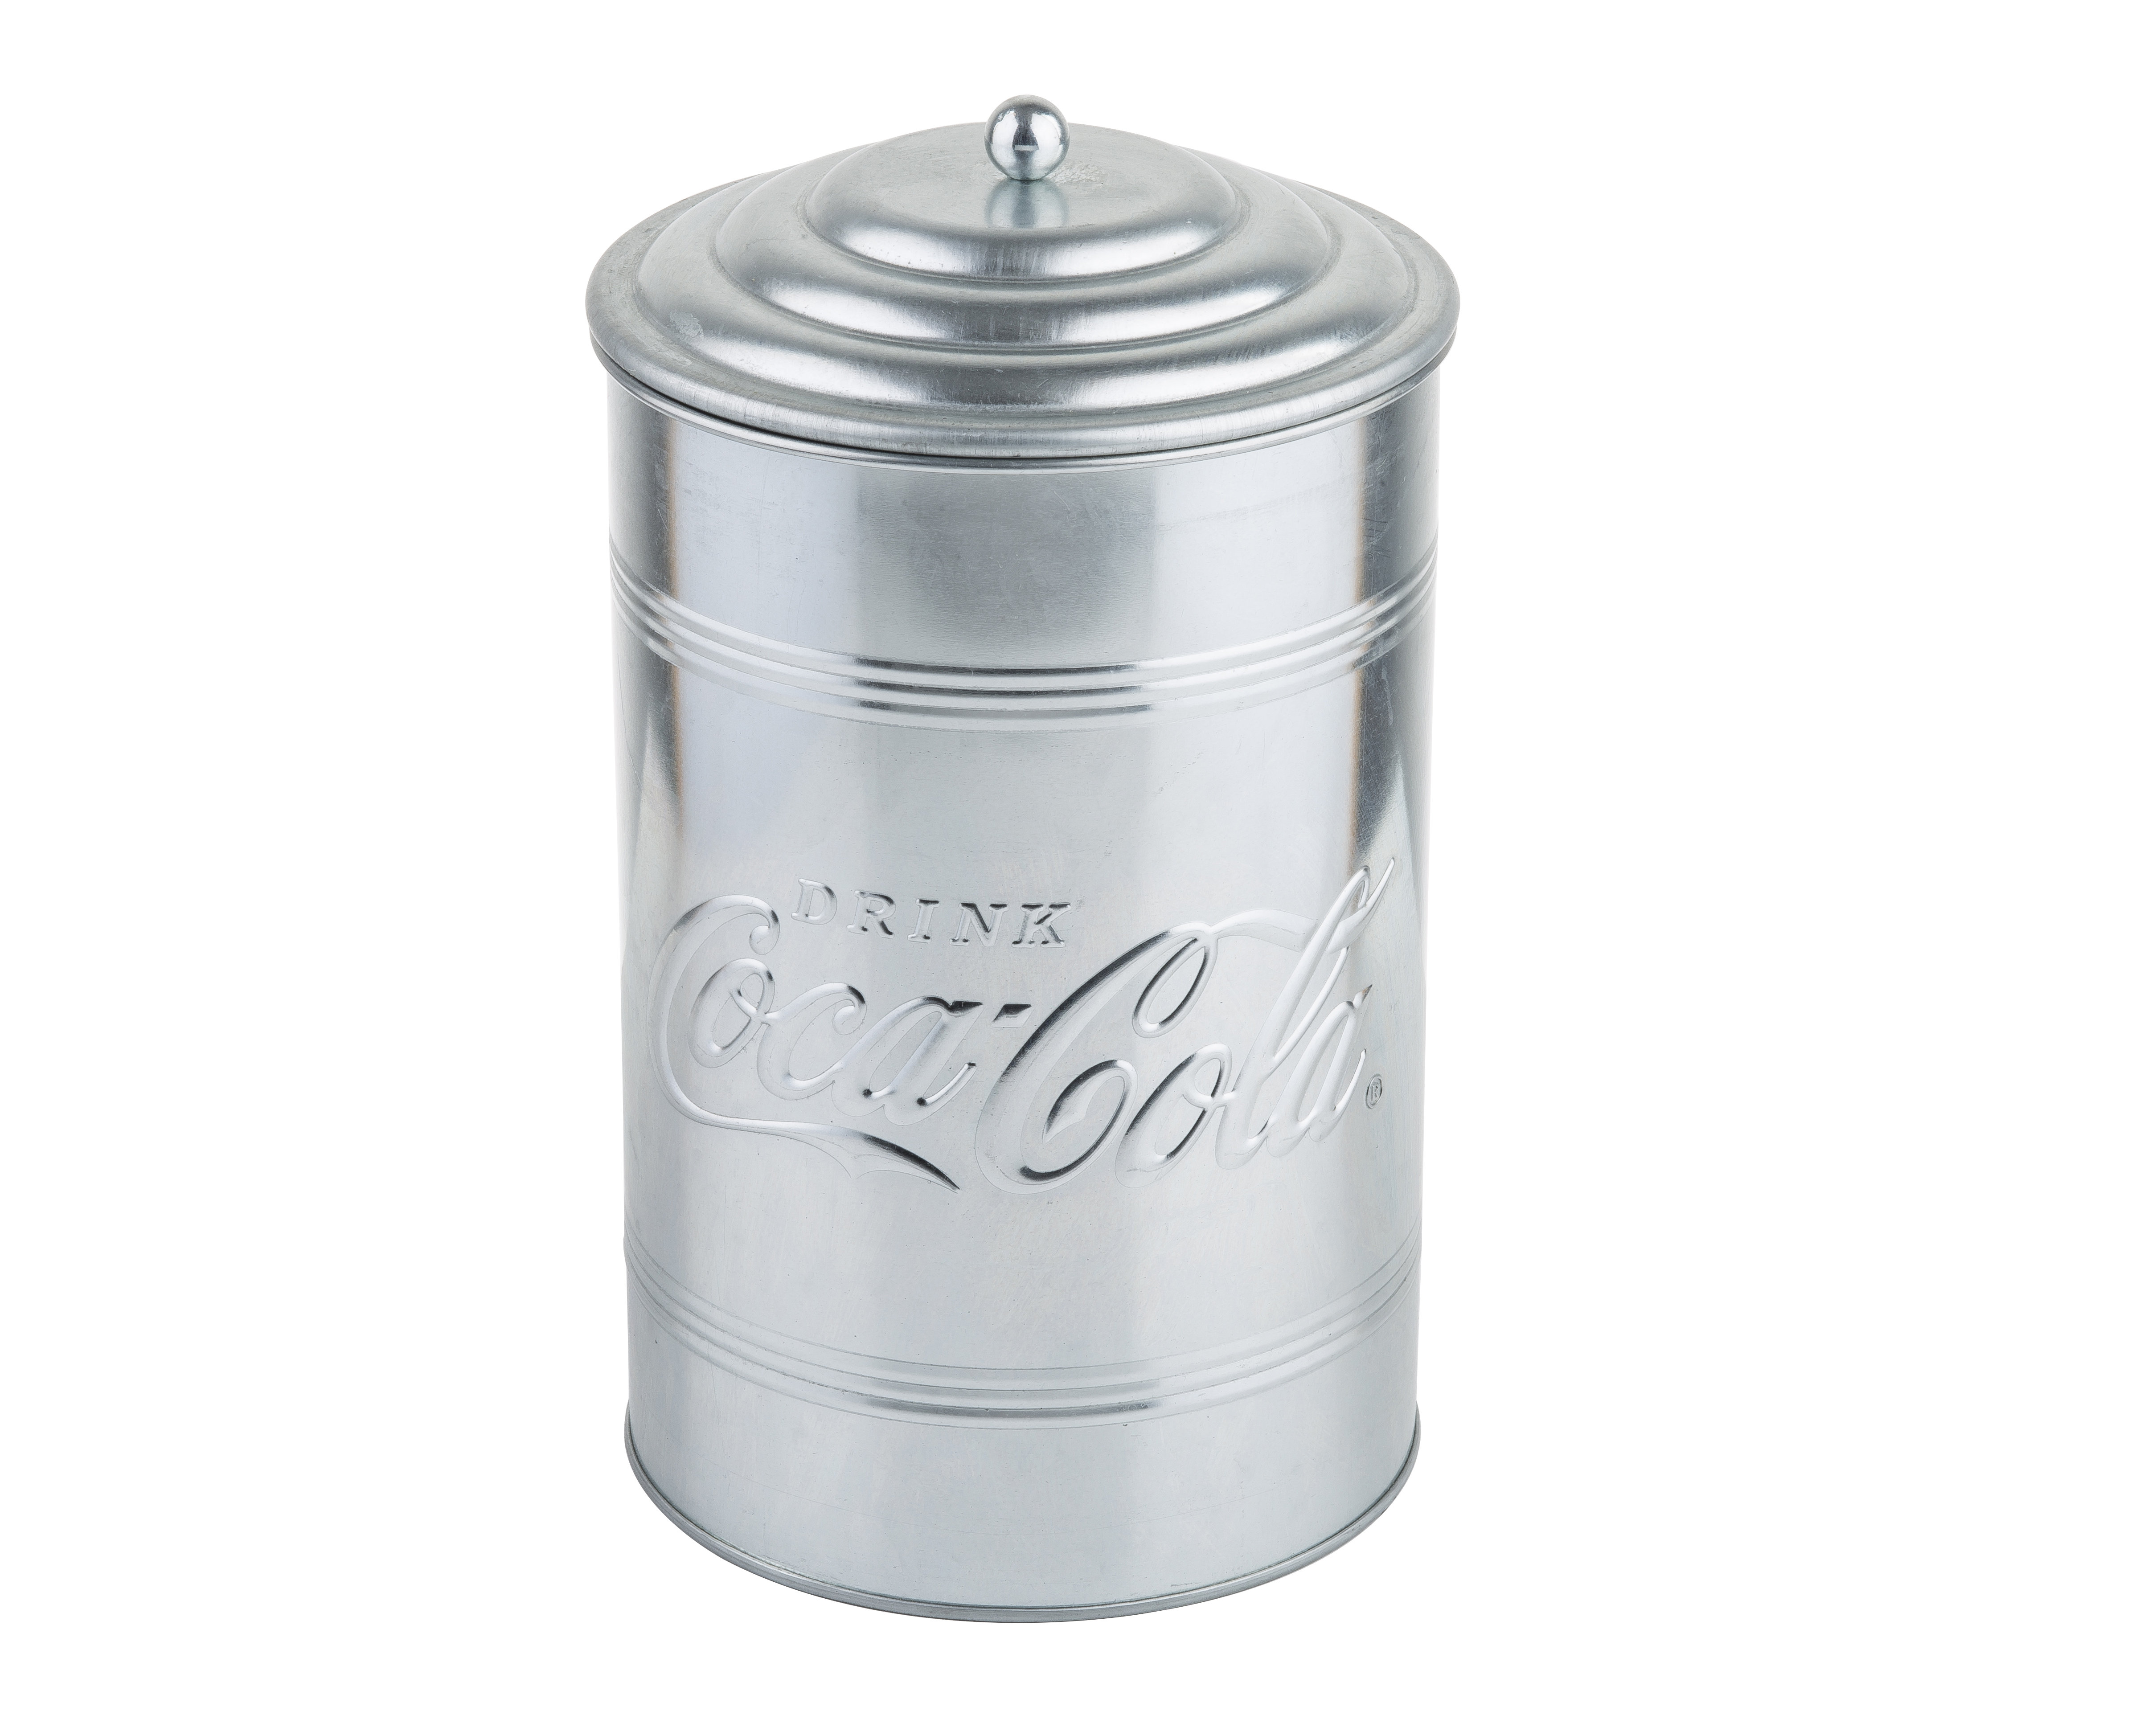 Coca-Cola Large Galvanized Canister Cookie Jar BRAND NEW 